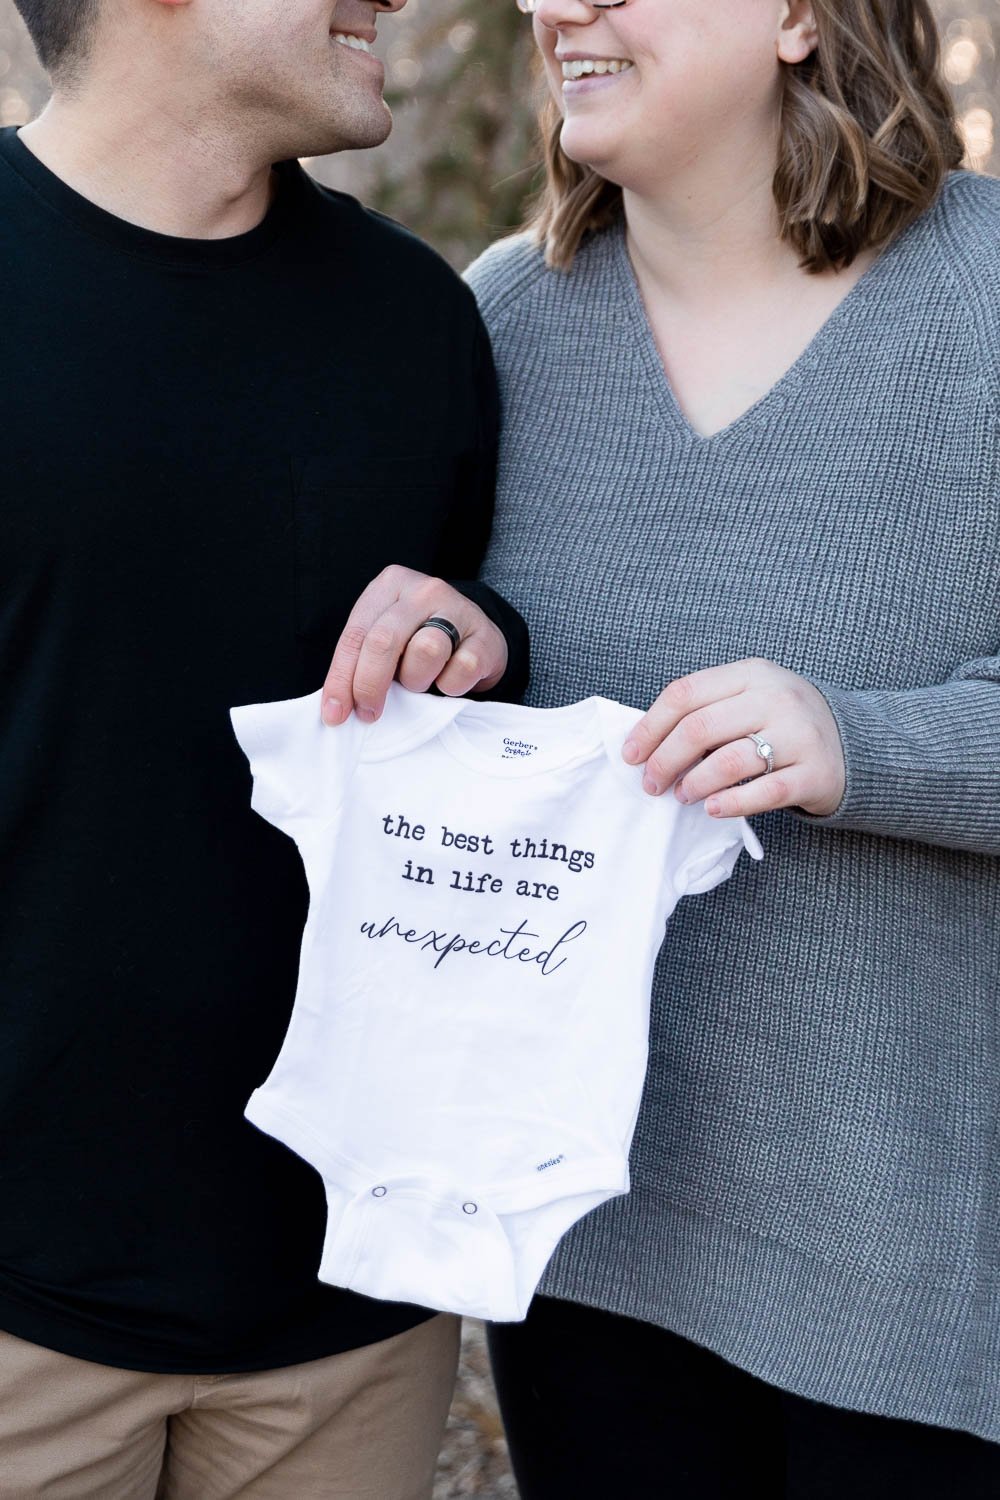 Mother and father with onesie that says "the best things in life are unexpected"